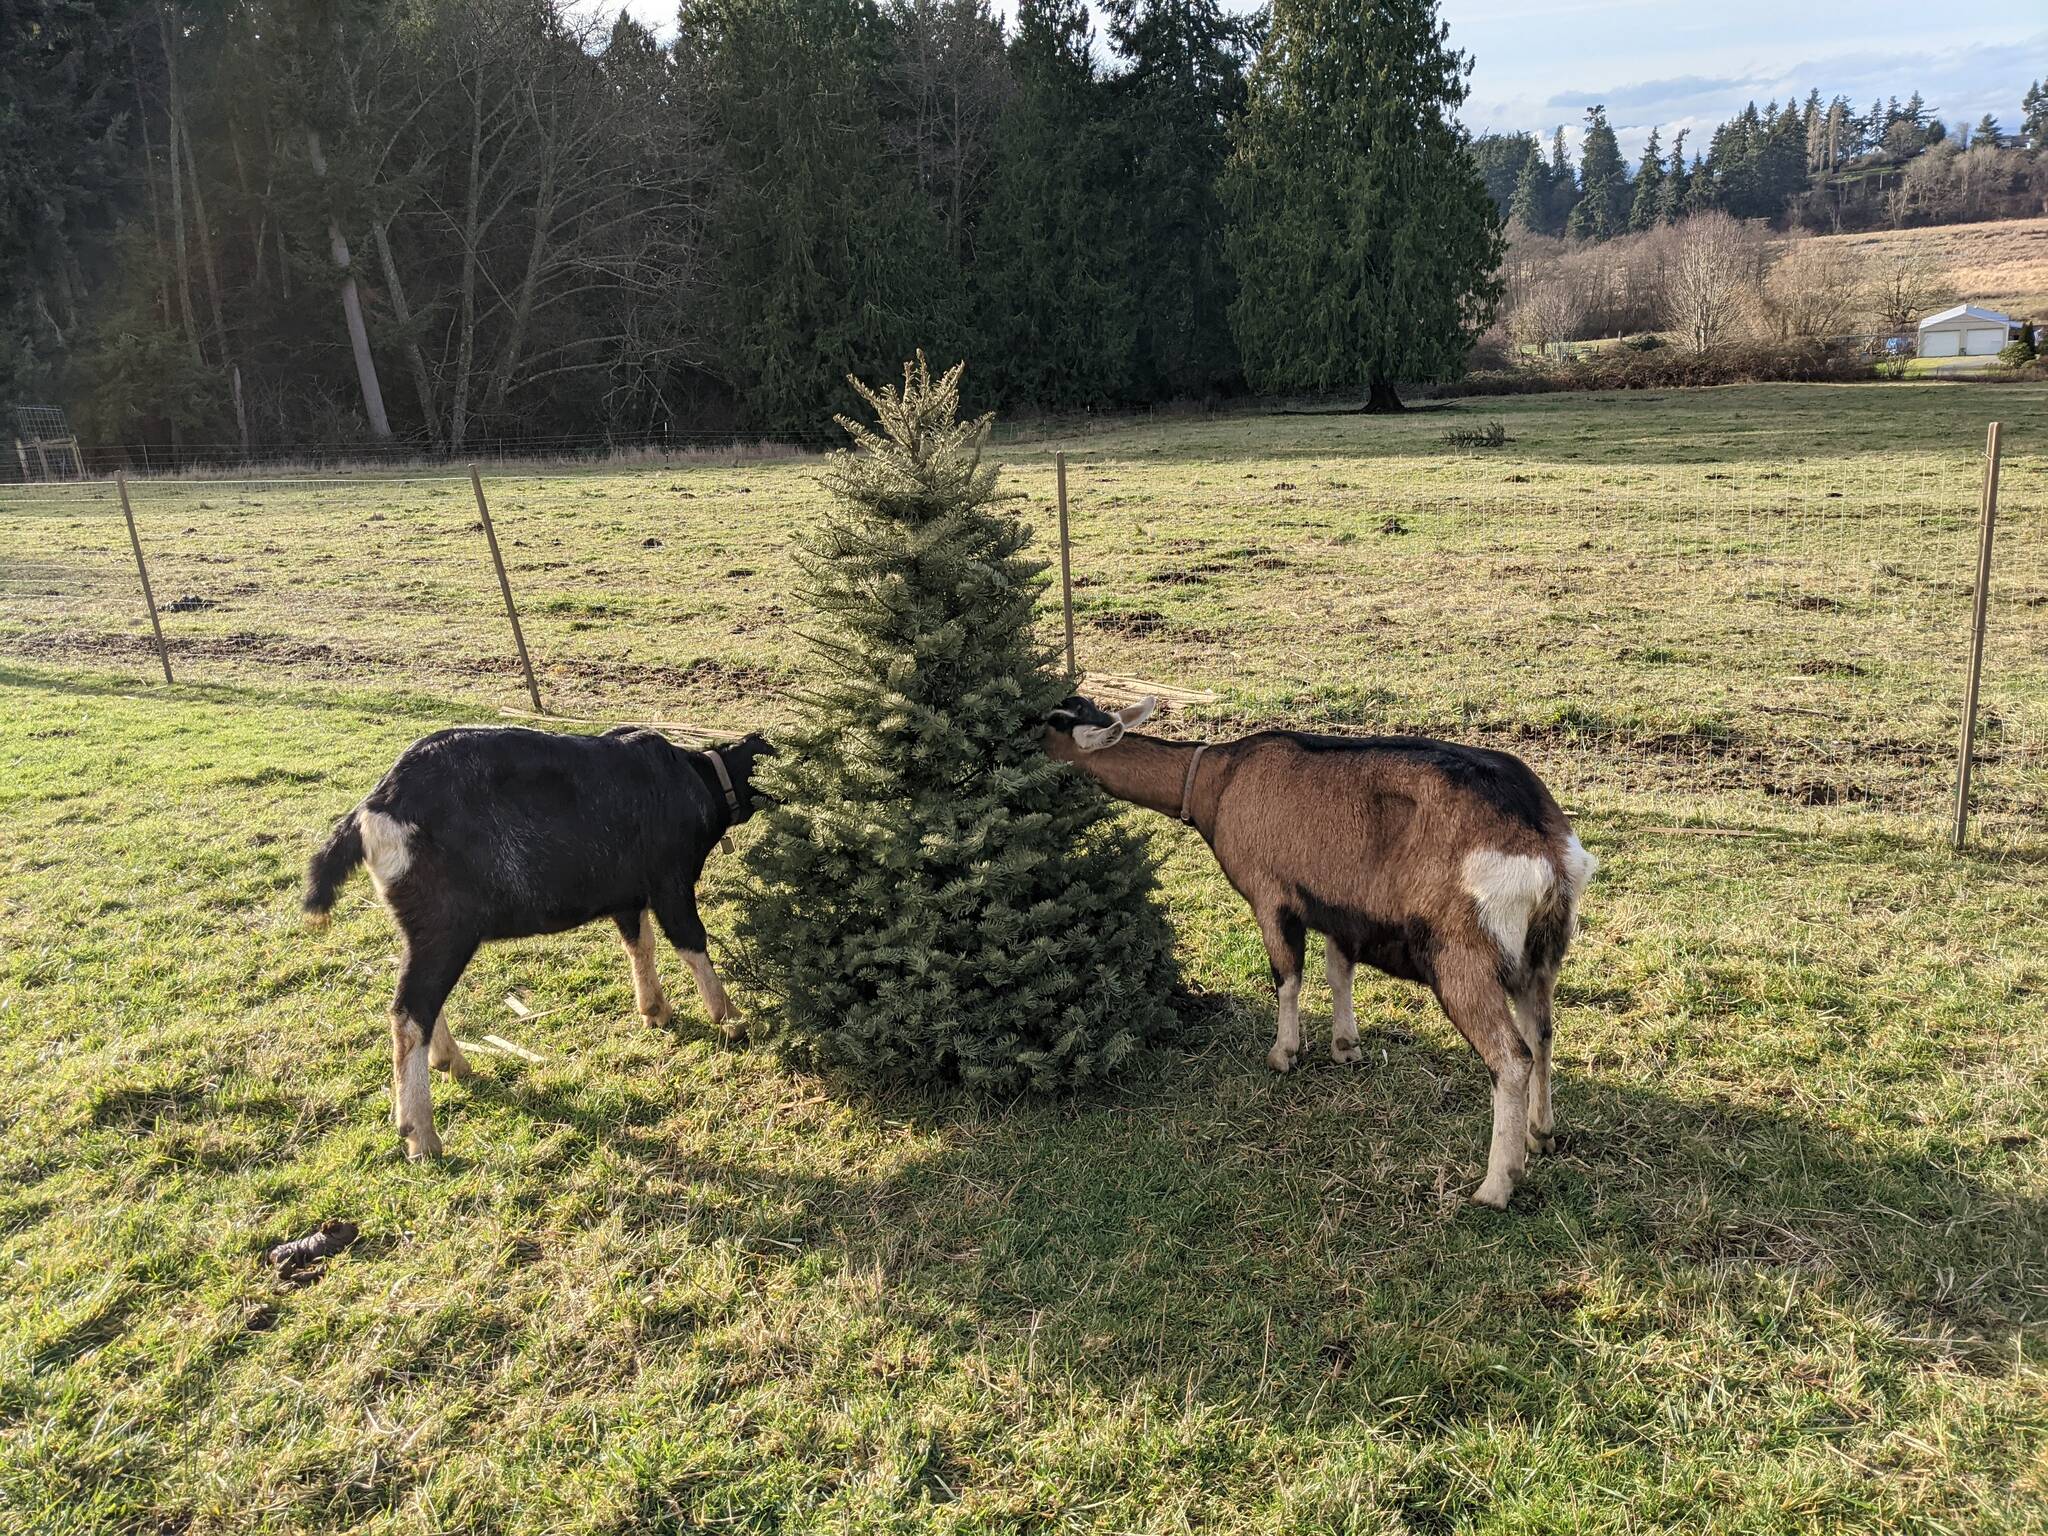 Photo provided
Goats Louis, left, and Juniper enjoy a tree donated in 2021 to Ballydidean Farm Sanctuary.